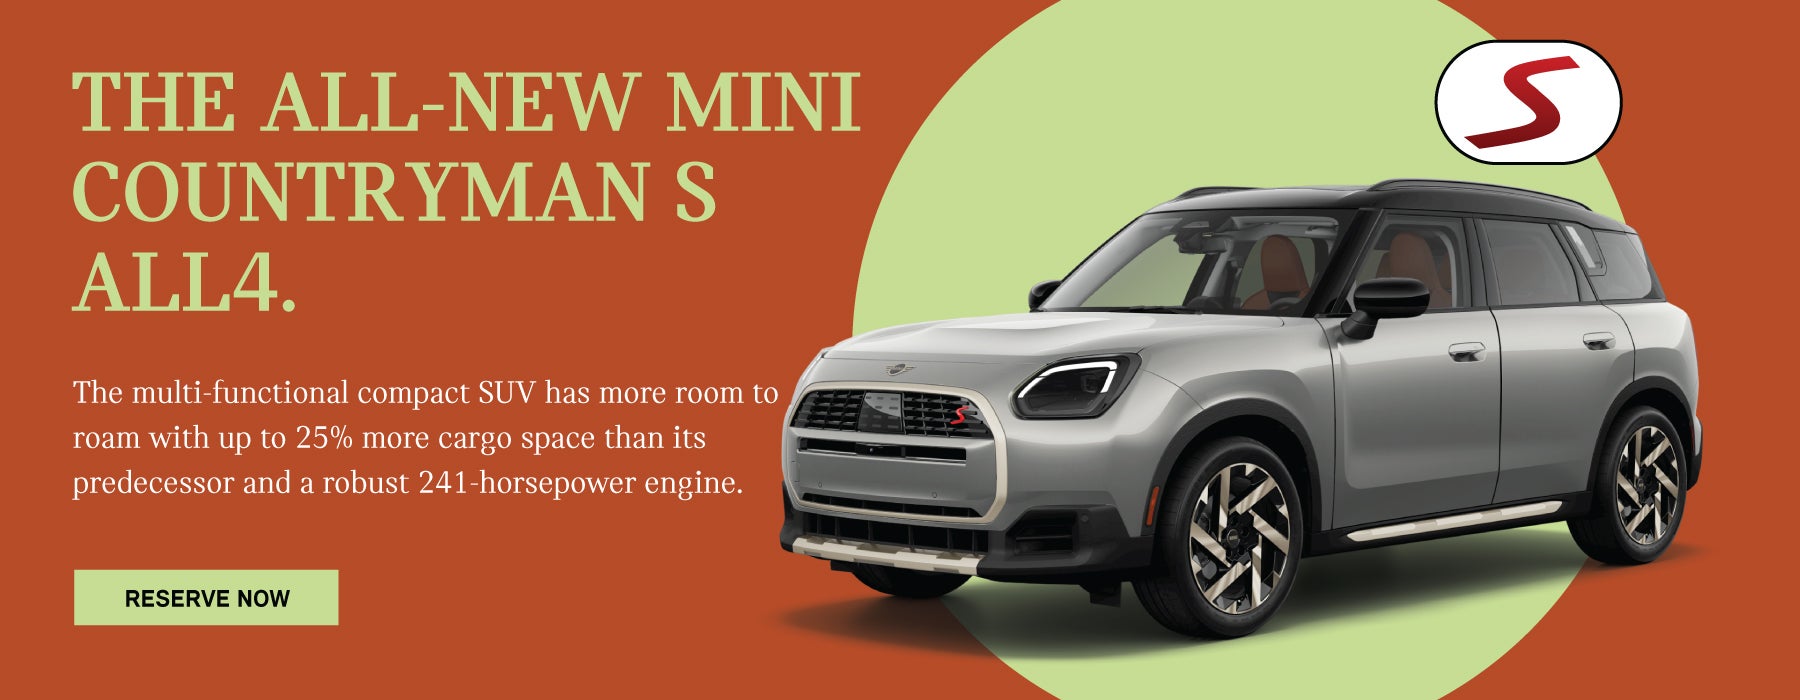 Pictured is a 3/4 driver side view of a grey mini countryman